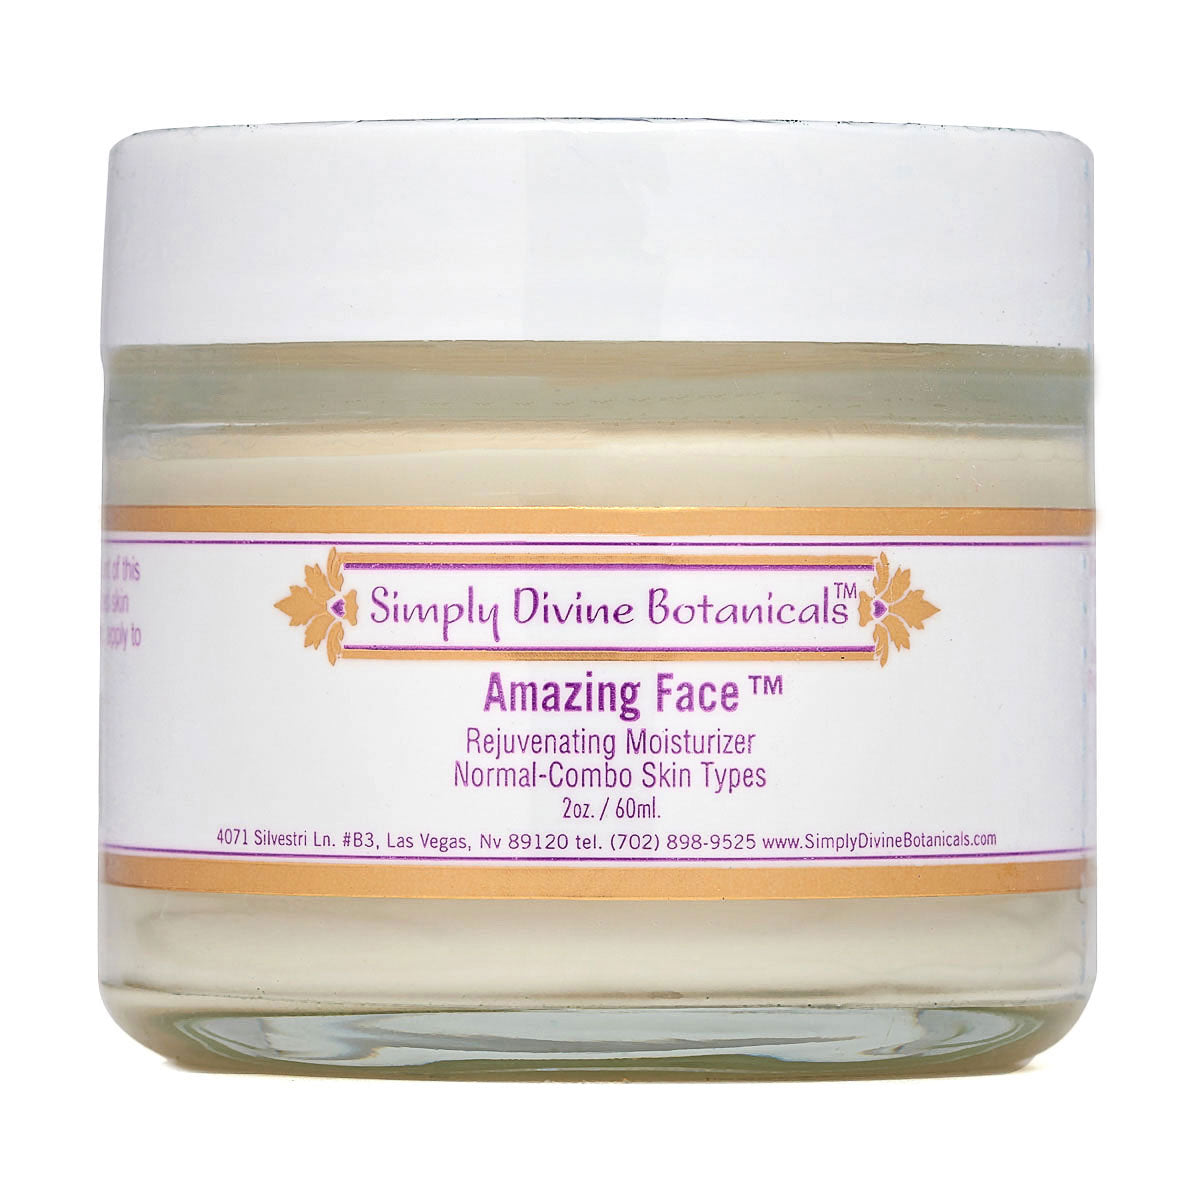 Amazing Face Moisturizer | Simply Divine Botanicals | Raw Living UK | Skin Care &amp; Beauty | Simply Divine Botanicals Amazing Face Rejuvenating Moisturiser: a Natural product for Normal &amp; Combination Skin, with luxurious Sandalwood &amp; Lemongrass.